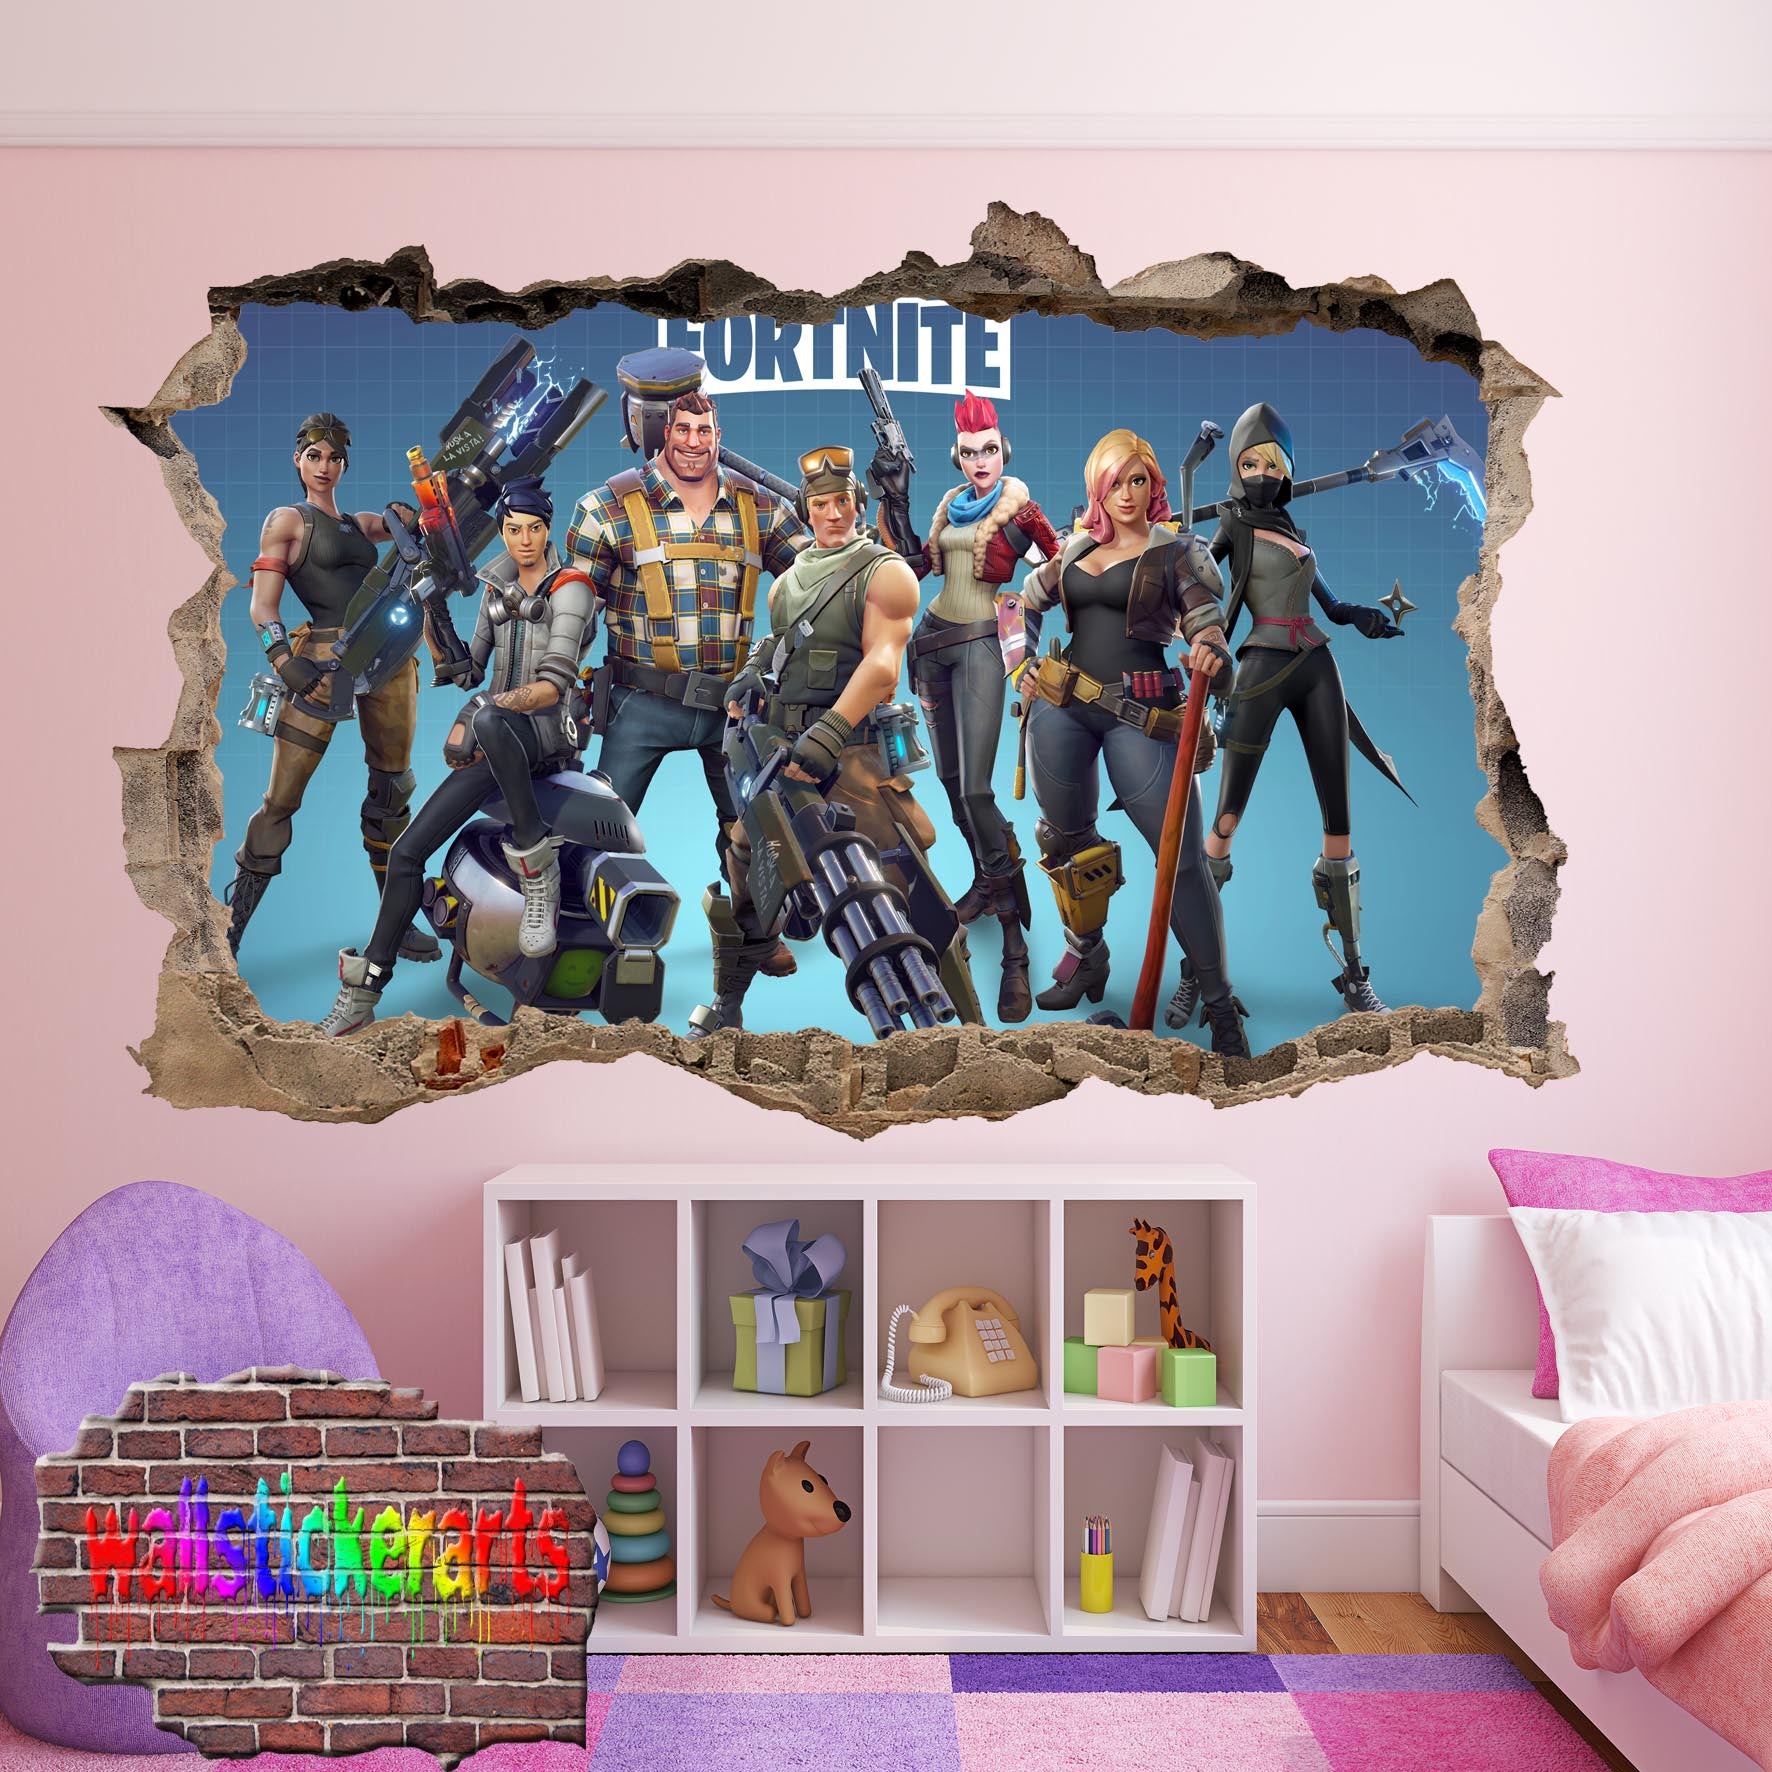 Fortnite Wall Sticker Mural Decal Poster